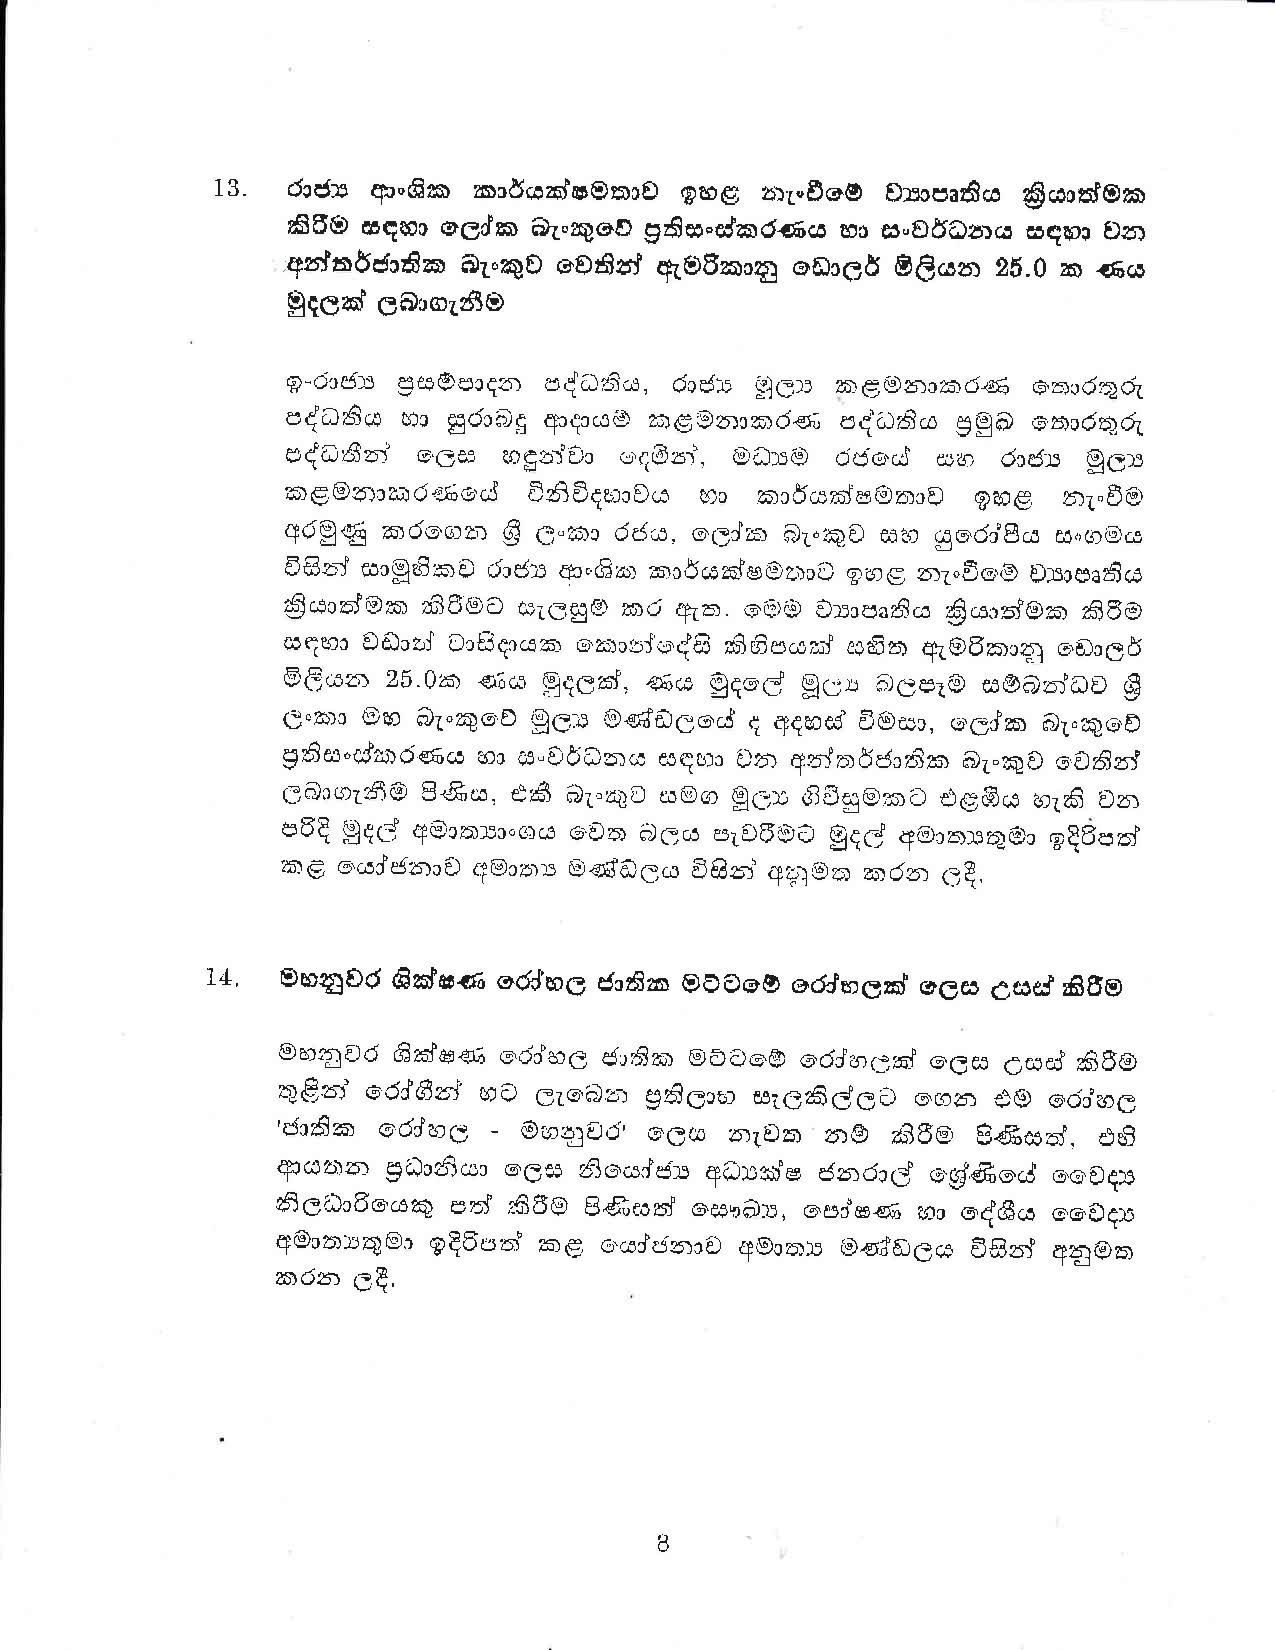 Cabinet Decision on 15.10.2019 page 008